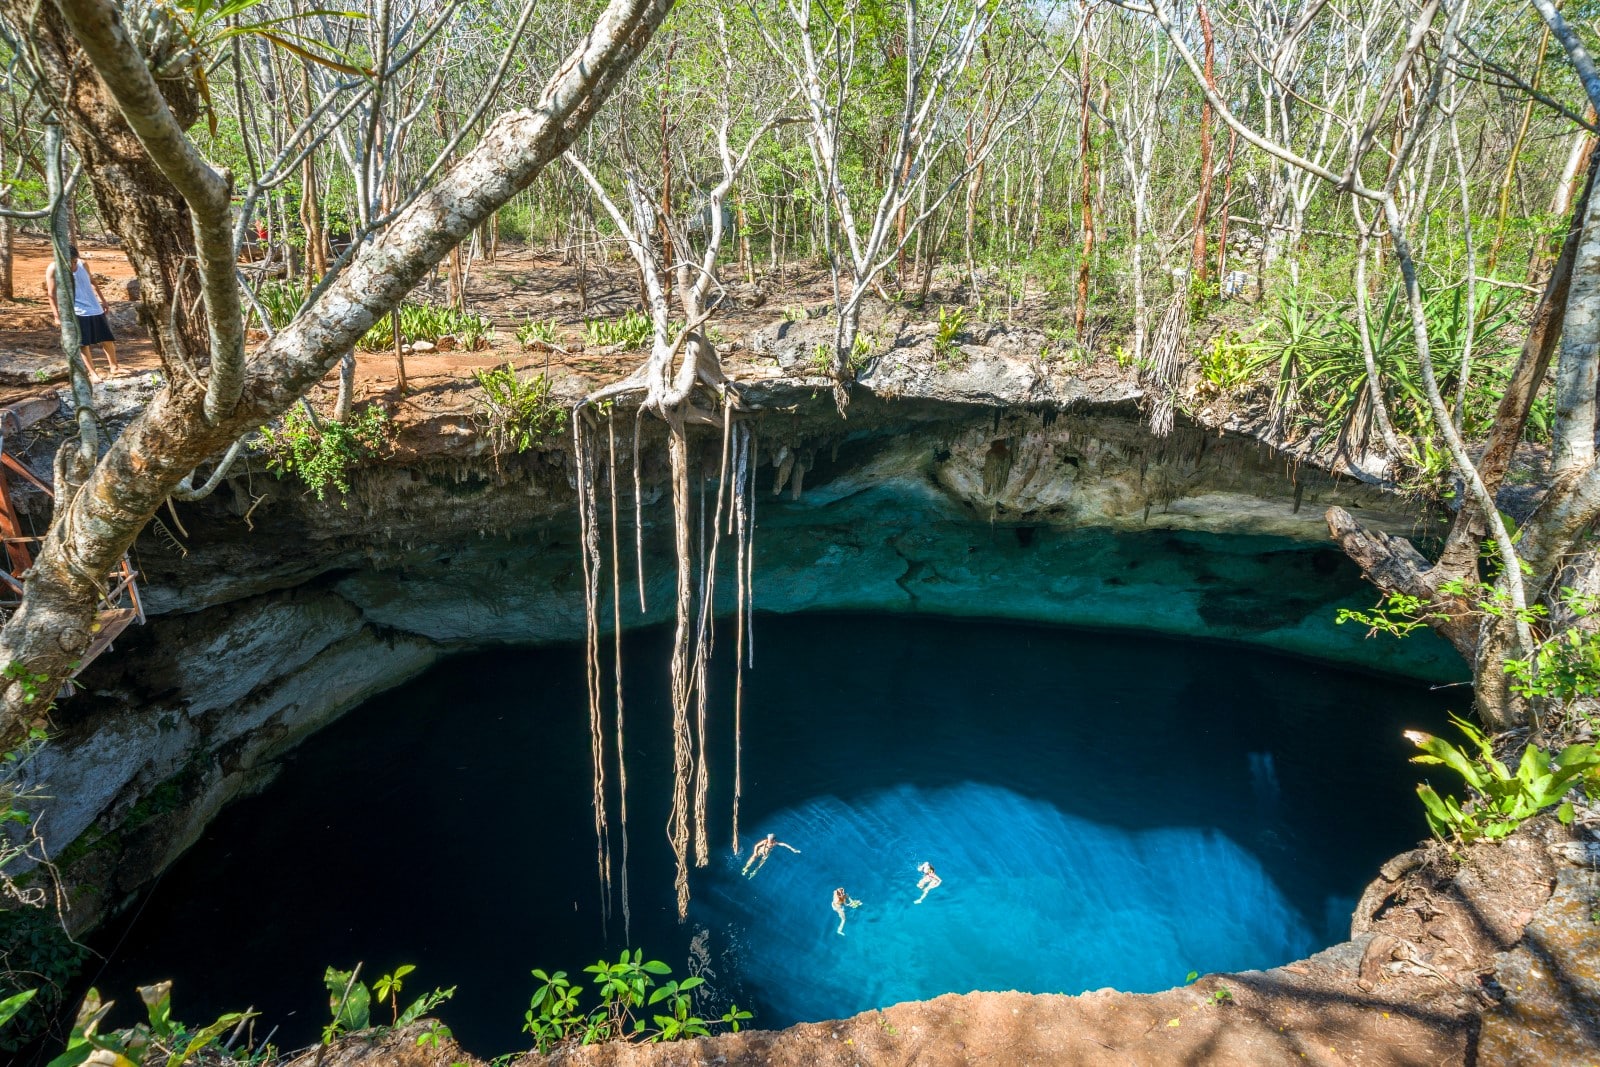 Noh Mozon Cenote with turquoise water and roots, Pixya, Yucatan